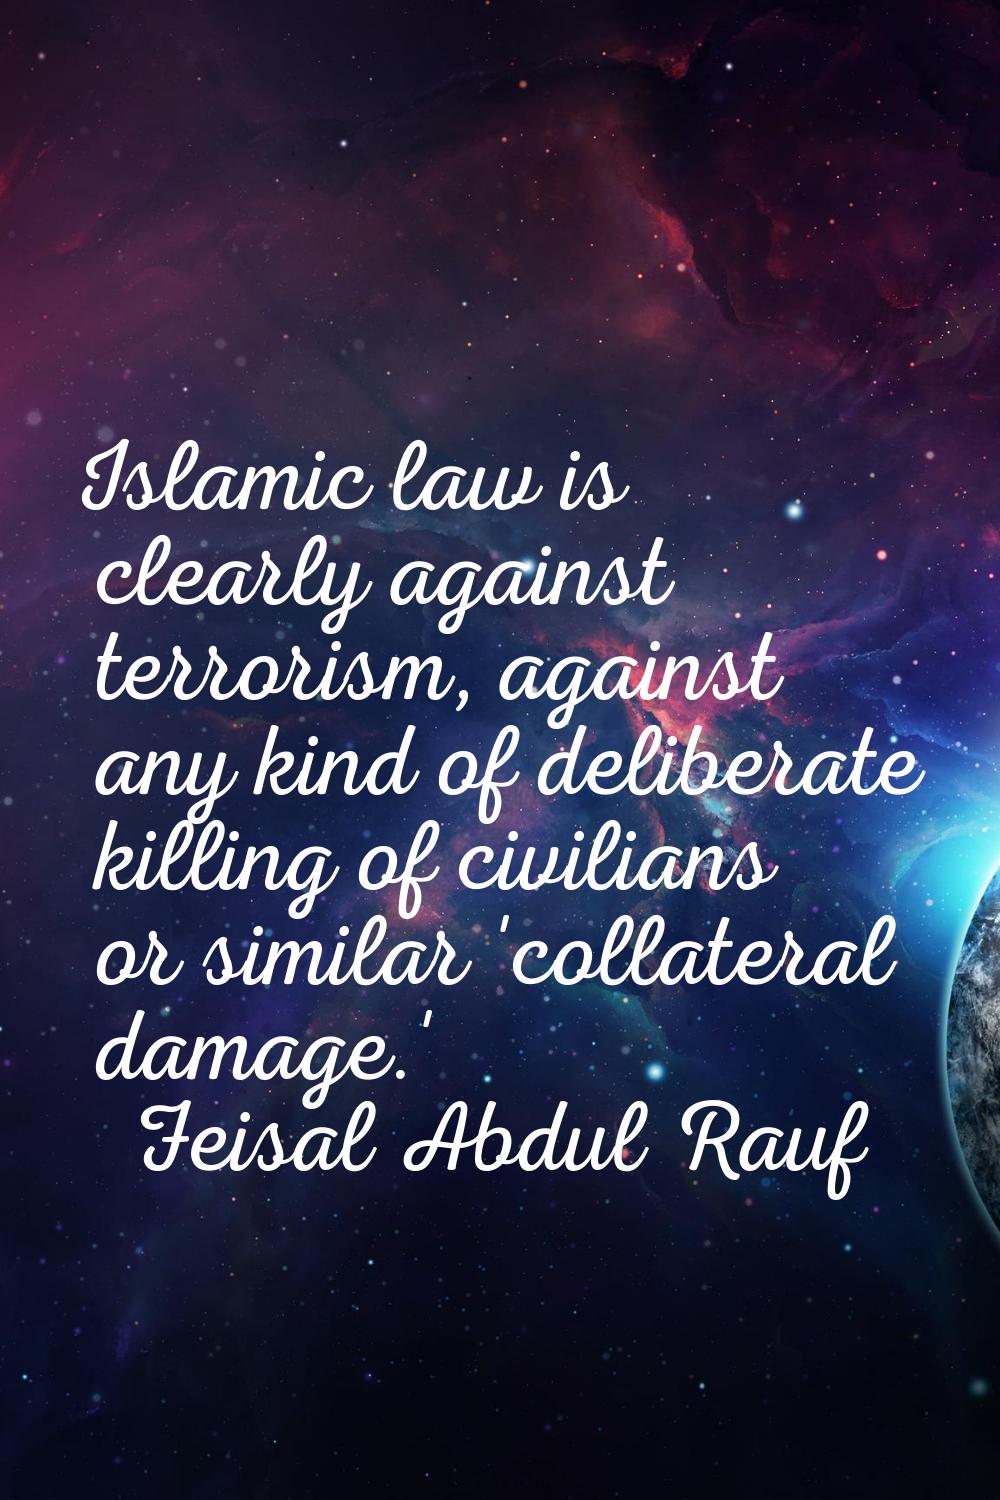 Islamic law is clearly against terrorism, against any kind of deliberate killing of civilians or si